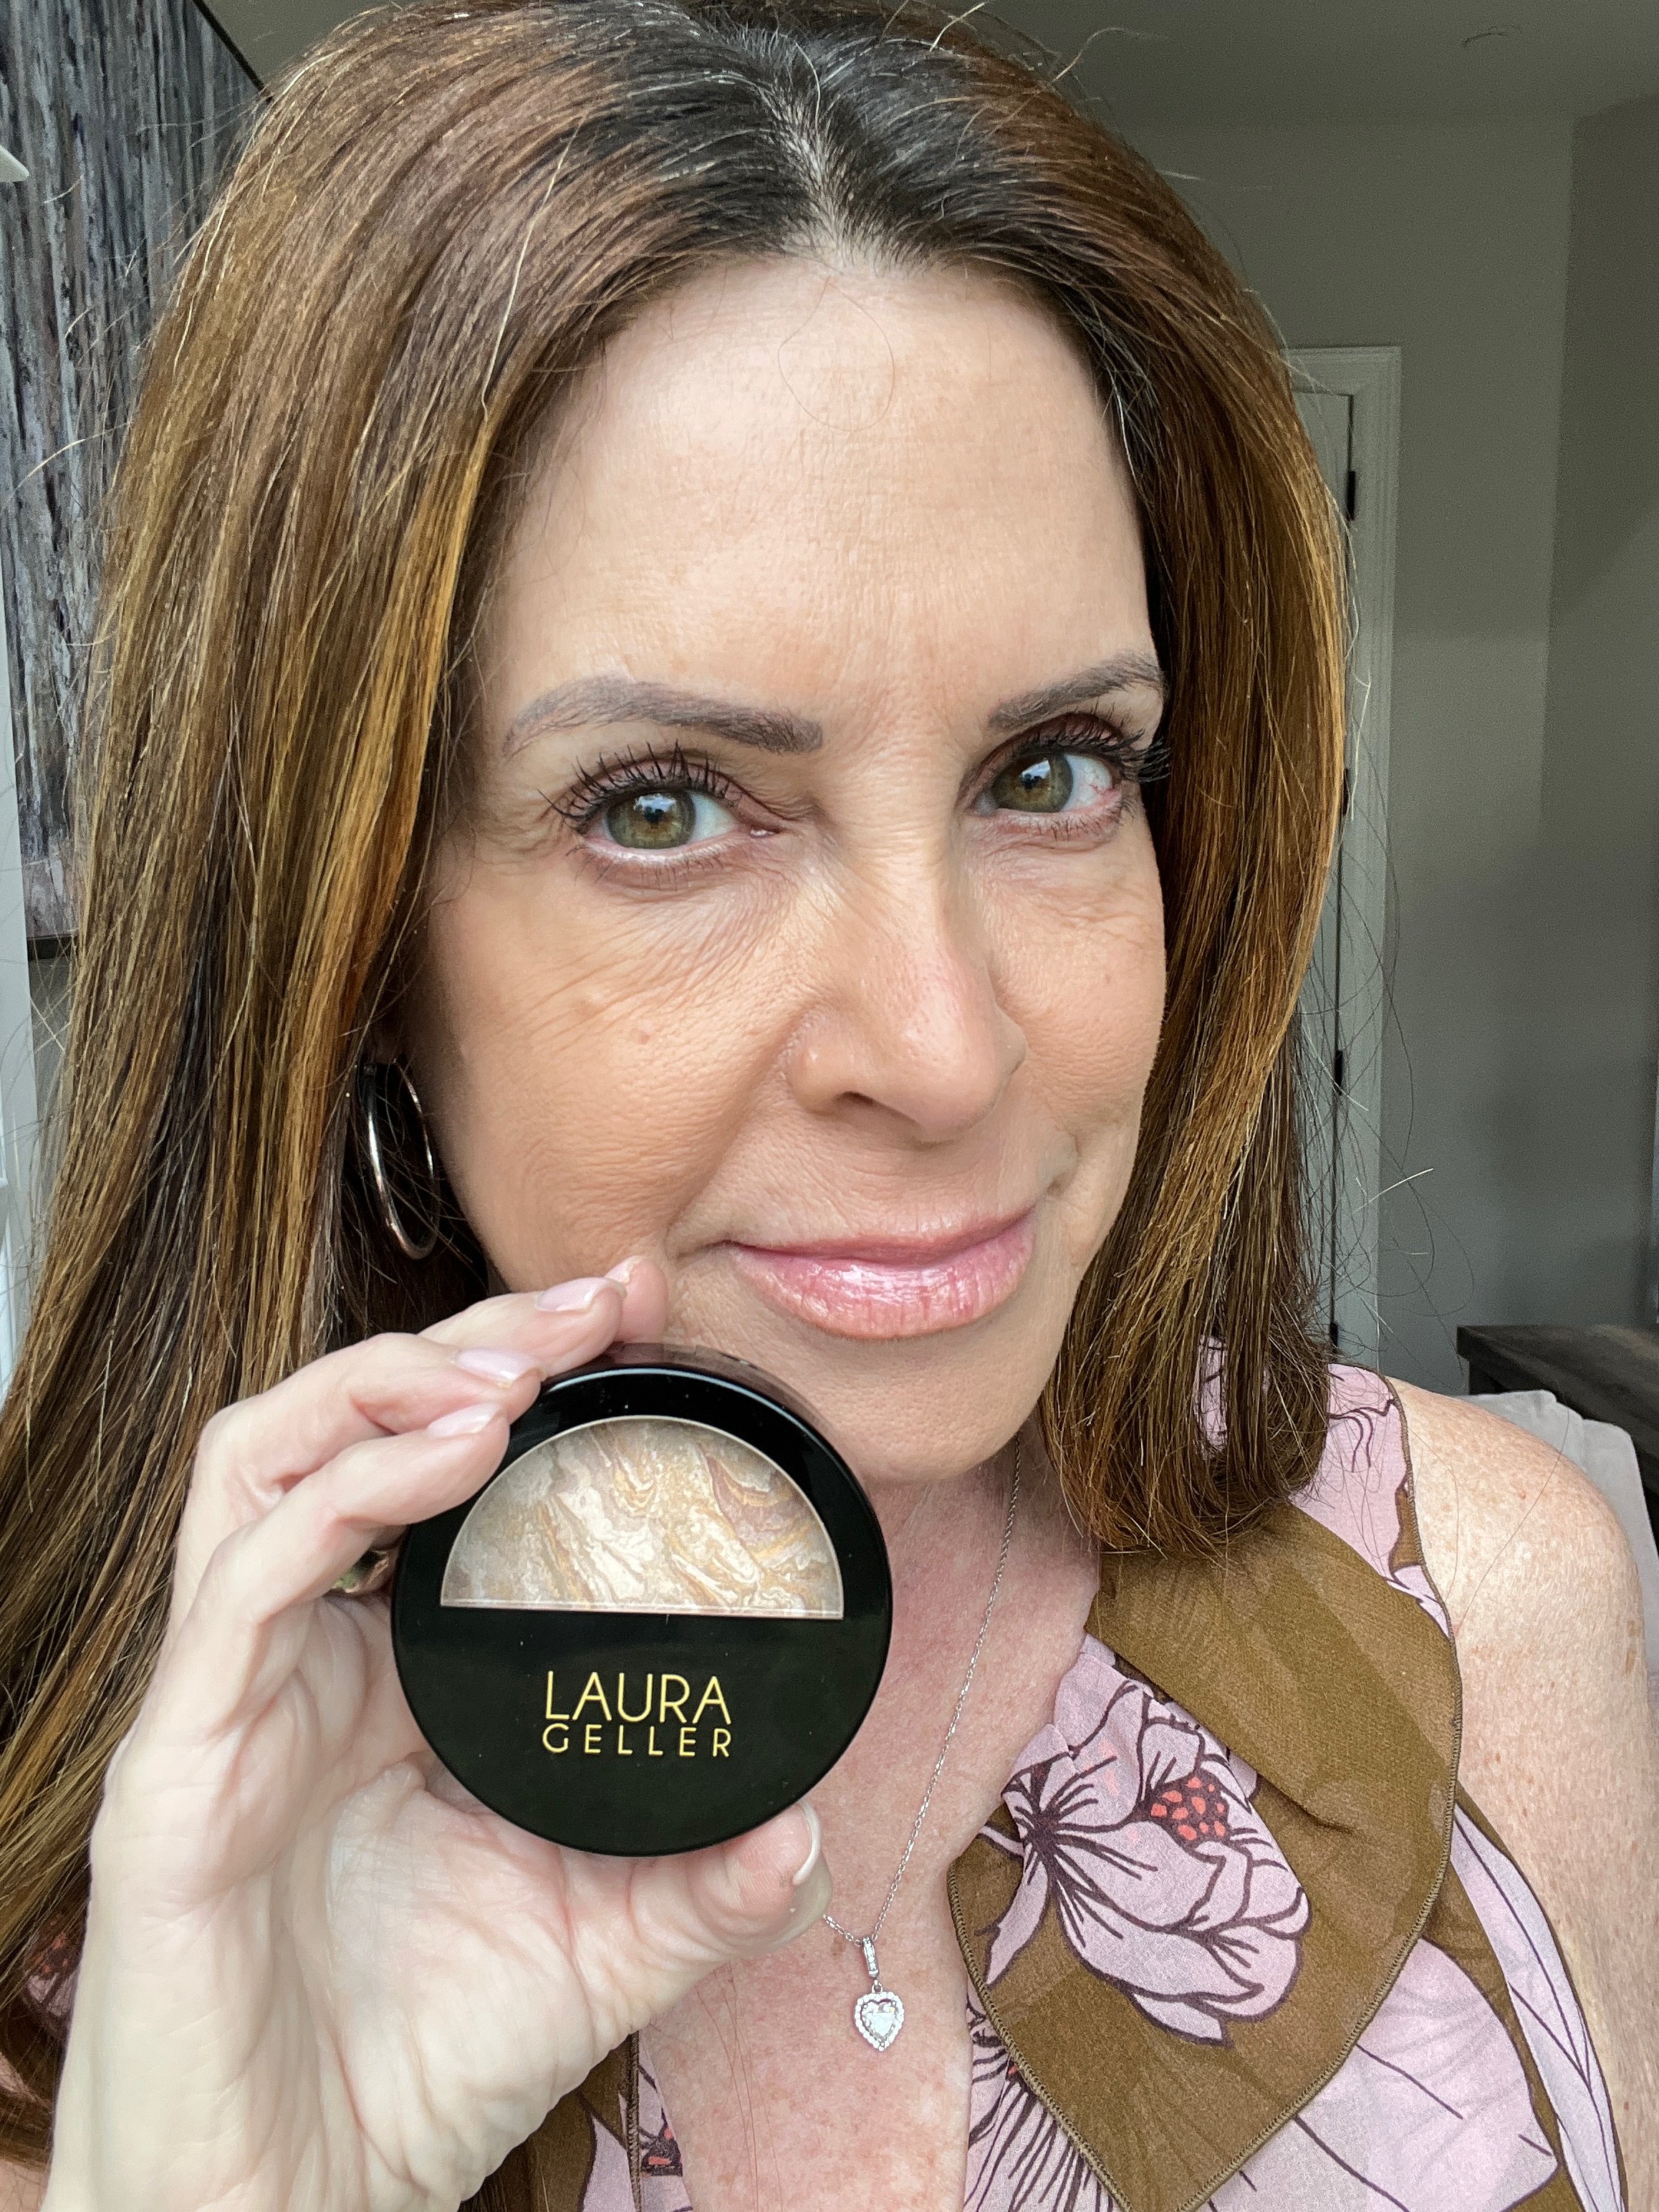 I Tried the Holy Grail ‘Baked’ Powder Foundation for Mature Skin—Is it Worth the Hype?